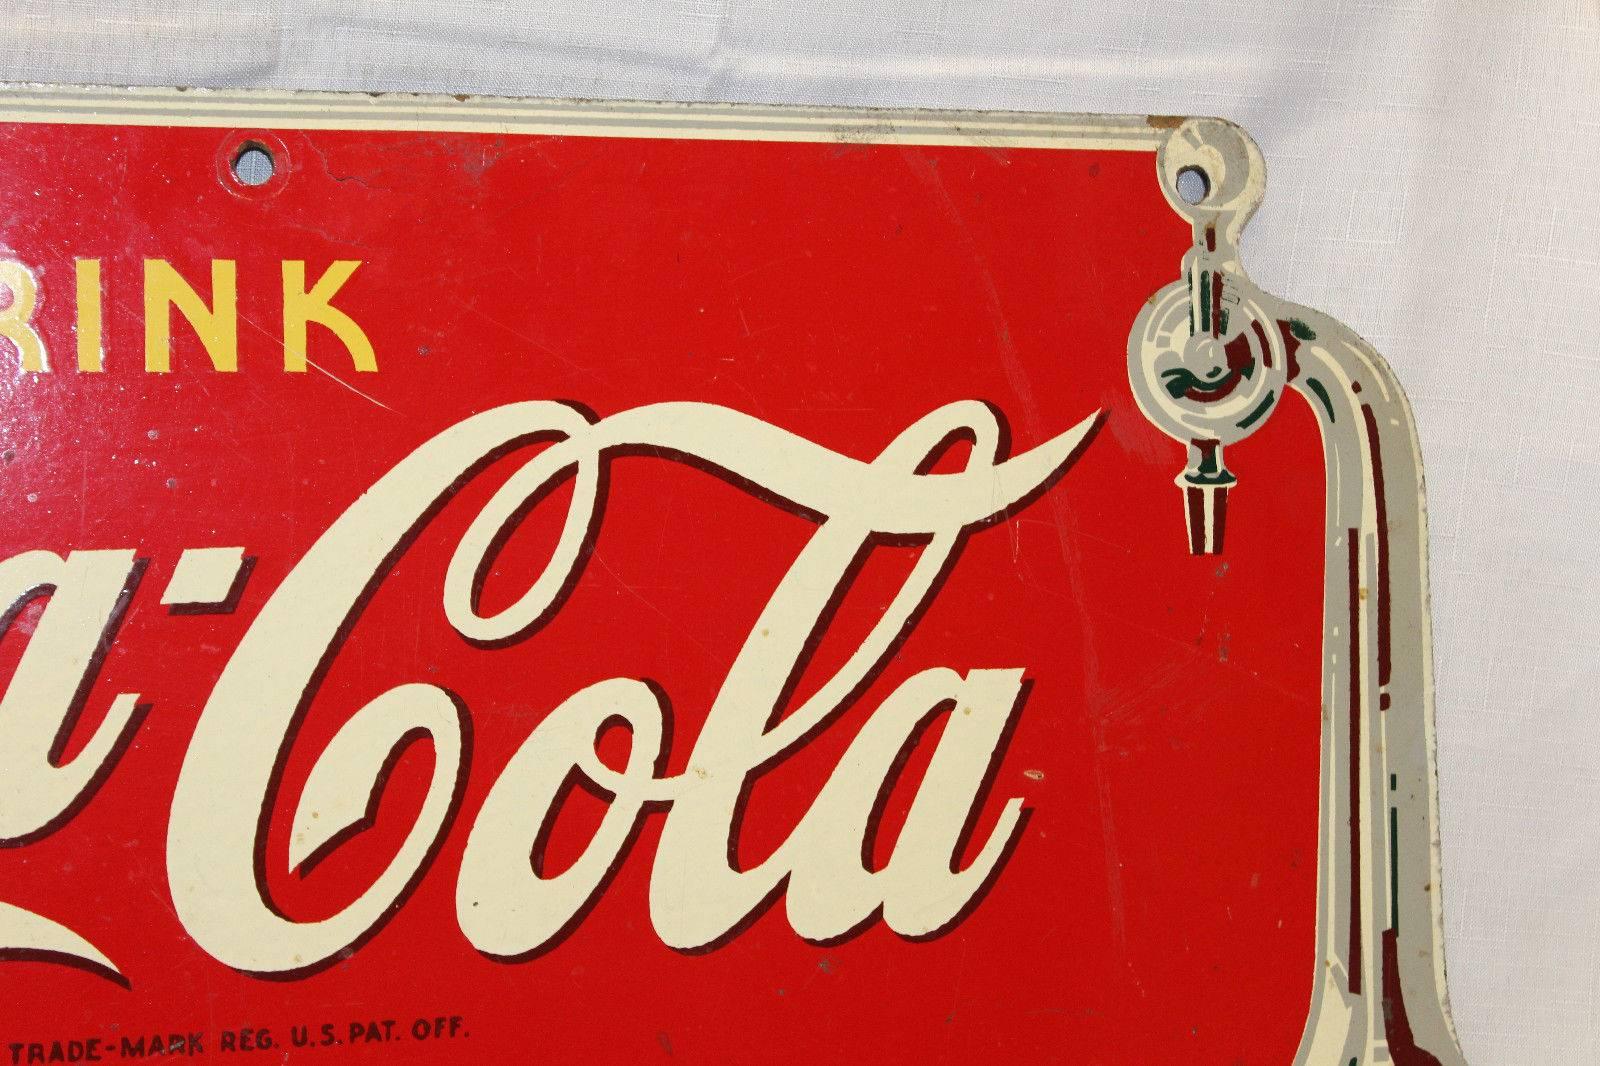 Amazing condition for a masonite sign. Most masonite signs were ruined or destroyed over time due to its fragile nature to other elements. Signs were generally tin or porcelain however coca cola made all kinds of advertising. This is one great